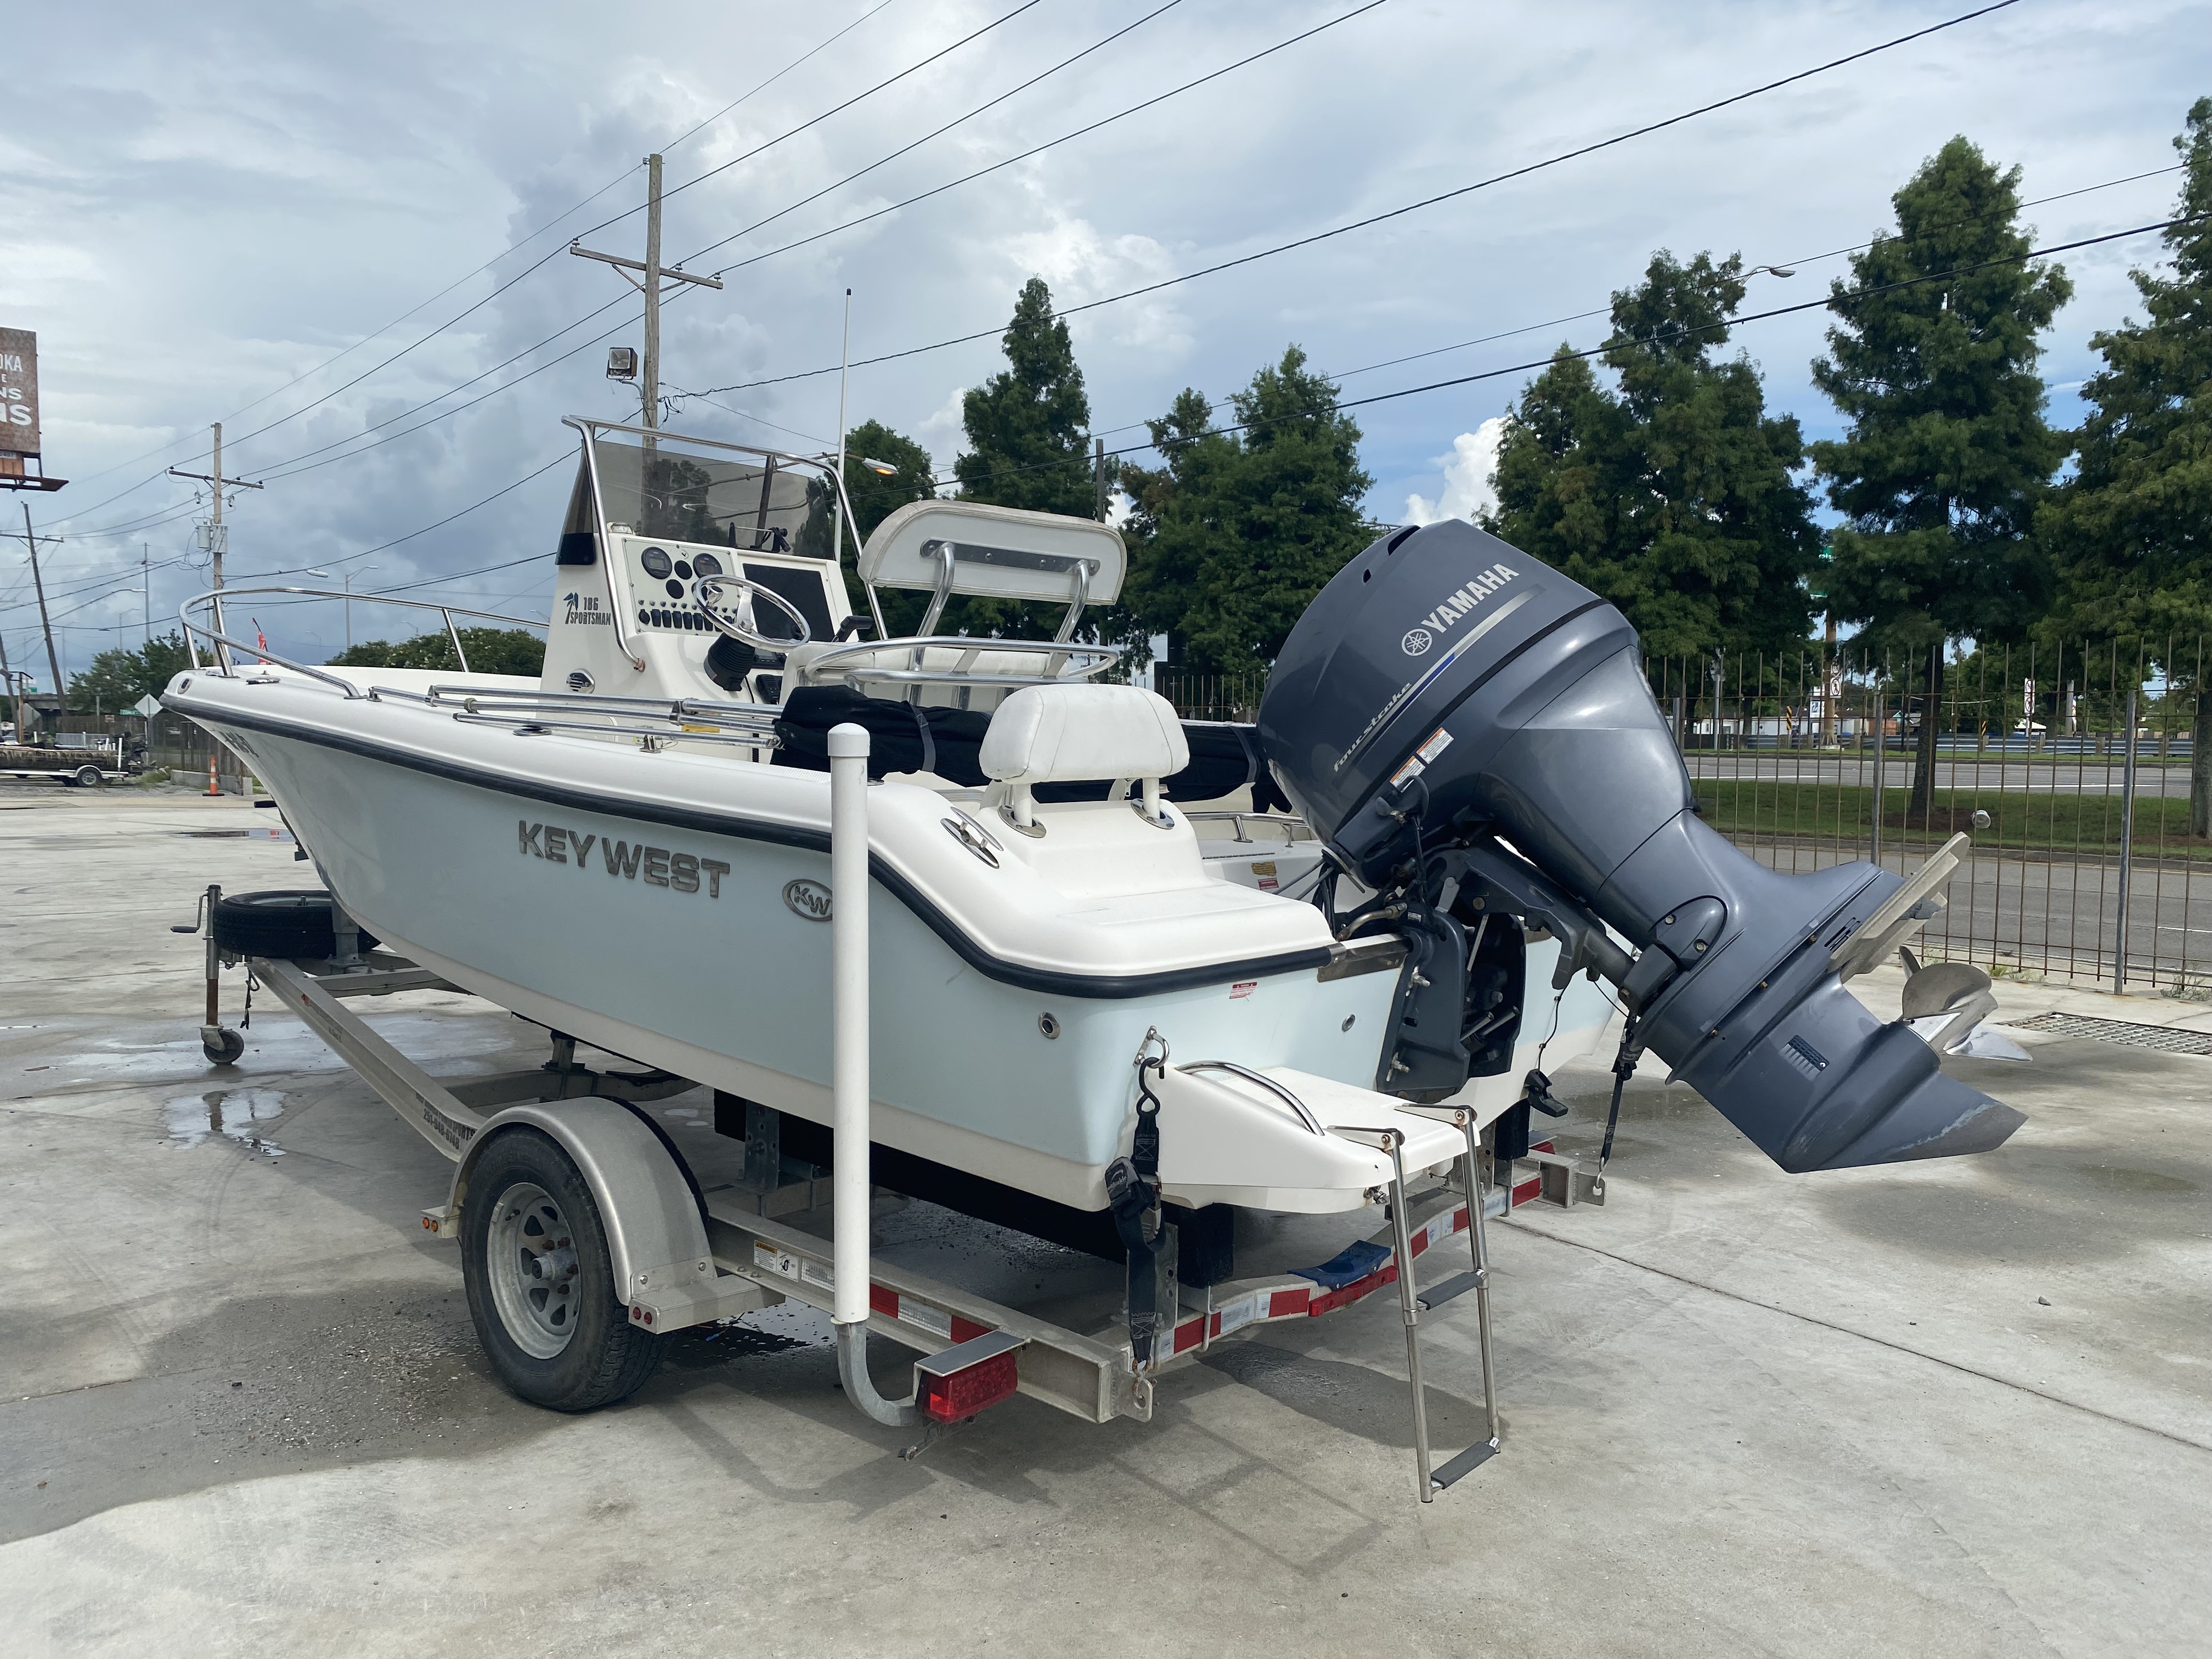 2013 Key West boat for sale, model of the boat is 186 Sportsman & Image # 12 of 12